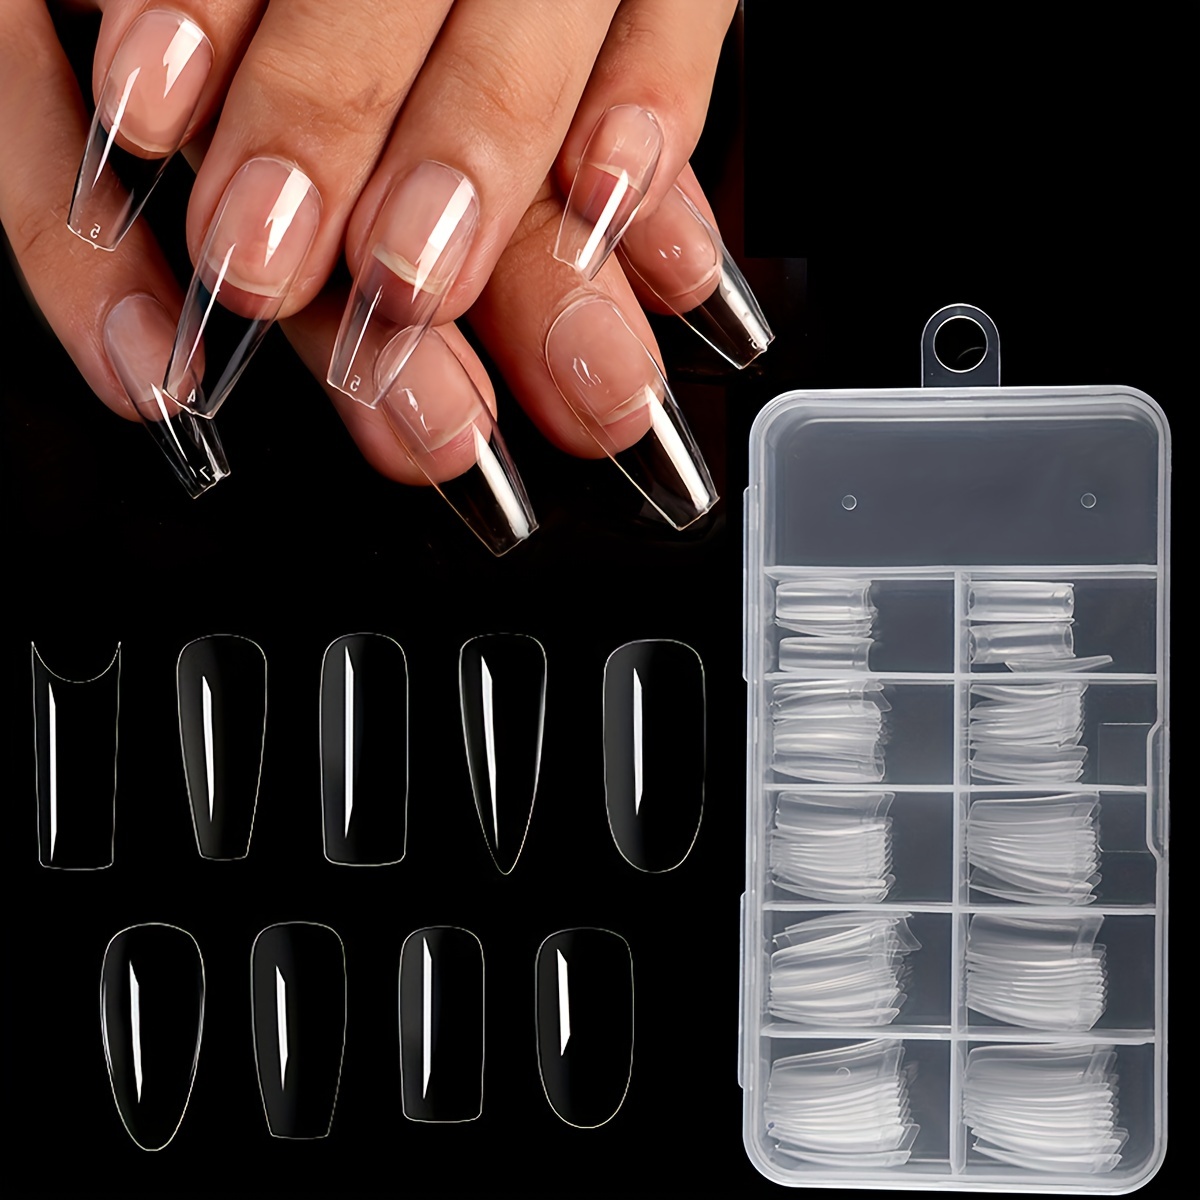 

Short Square Almond Coffin Nail Tips - 100pcs Clear Soft Nail Tips Full Cover Gel Nails False Nails Pre-shaped Acrylic Press On Nails For Extensions Easy For Home Diy Nail Salon